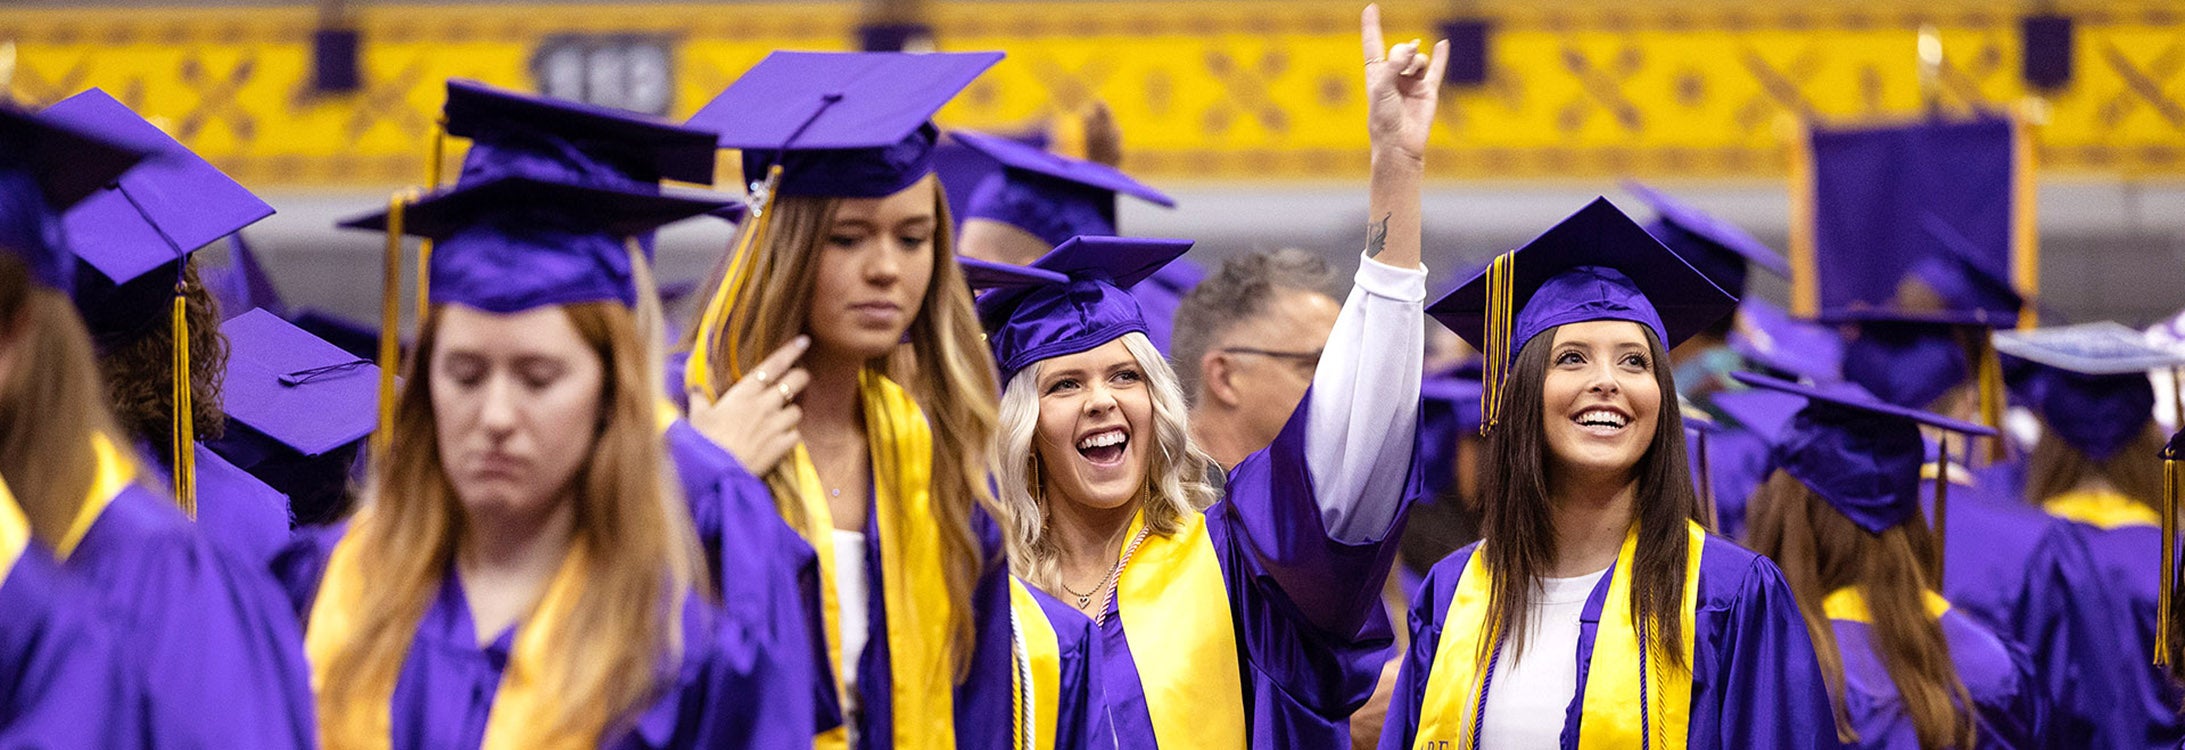 Almost 2,000 graduates were recognized at East Carolina University’s fall 2022 commencement ceremony in Minges Coliseum.